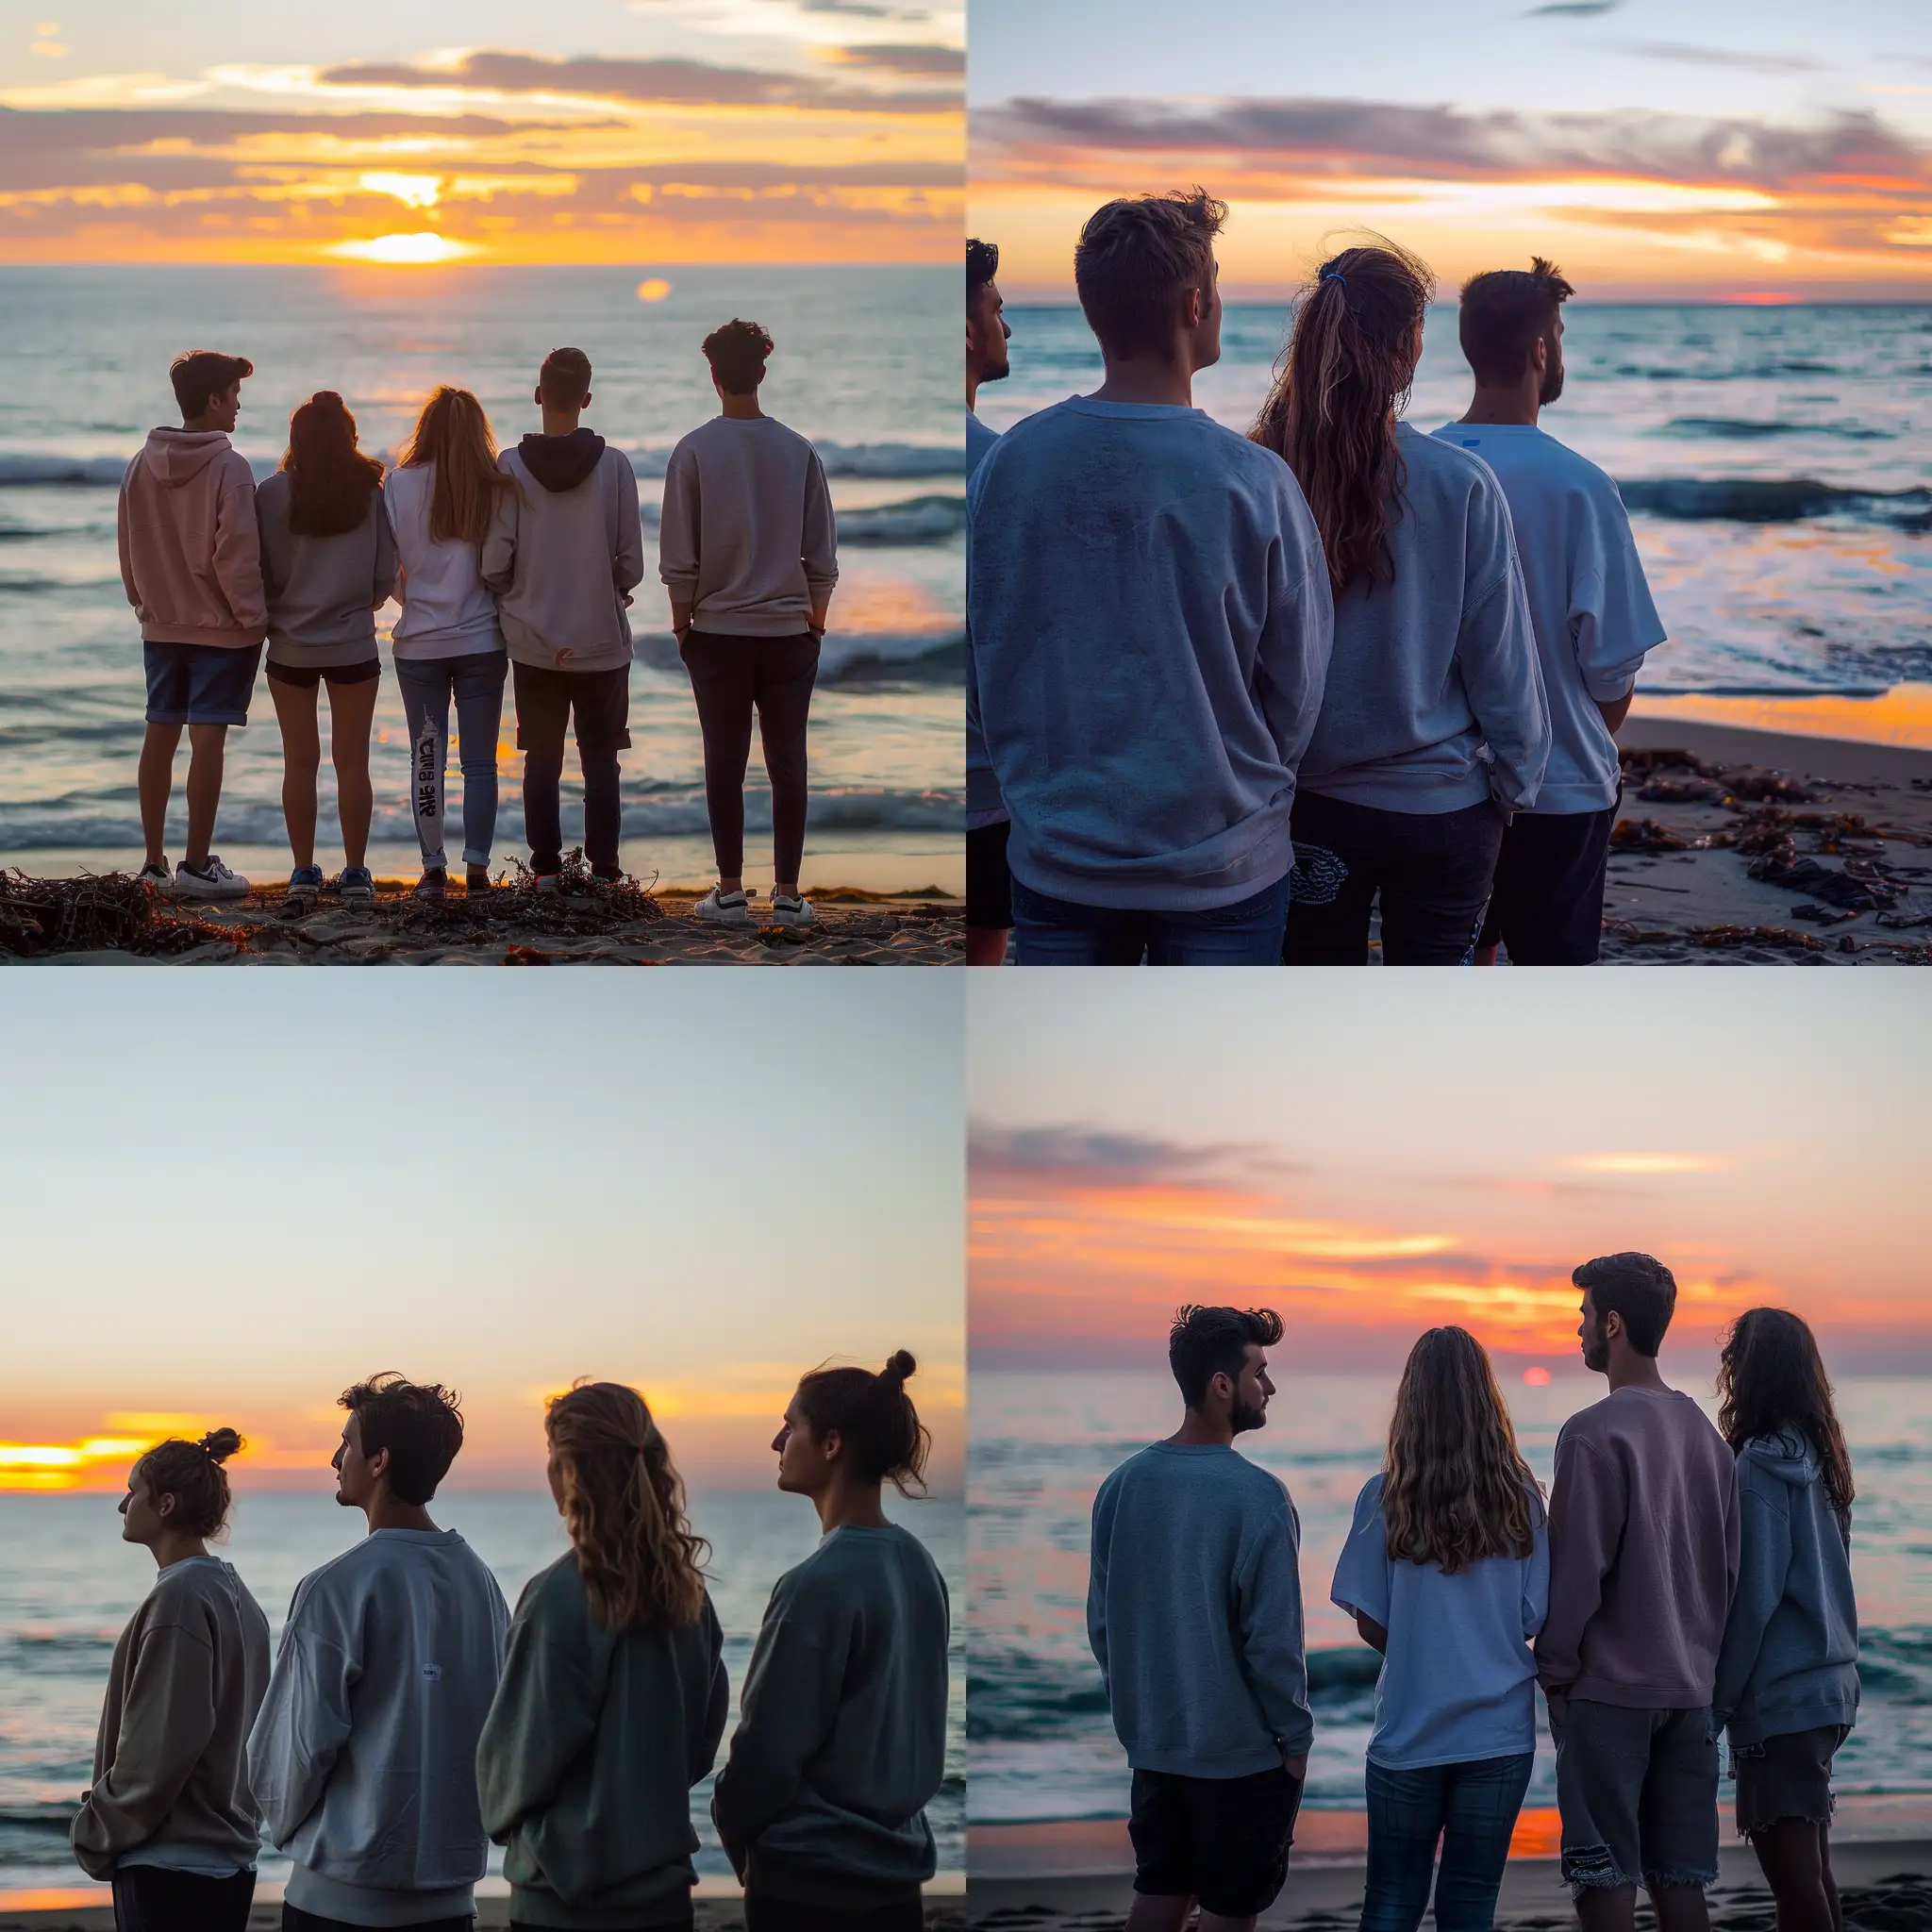 Friends-Admiring-Sunset-Seascape-on-Beach-Natural-Expression-and-Casual-Attire